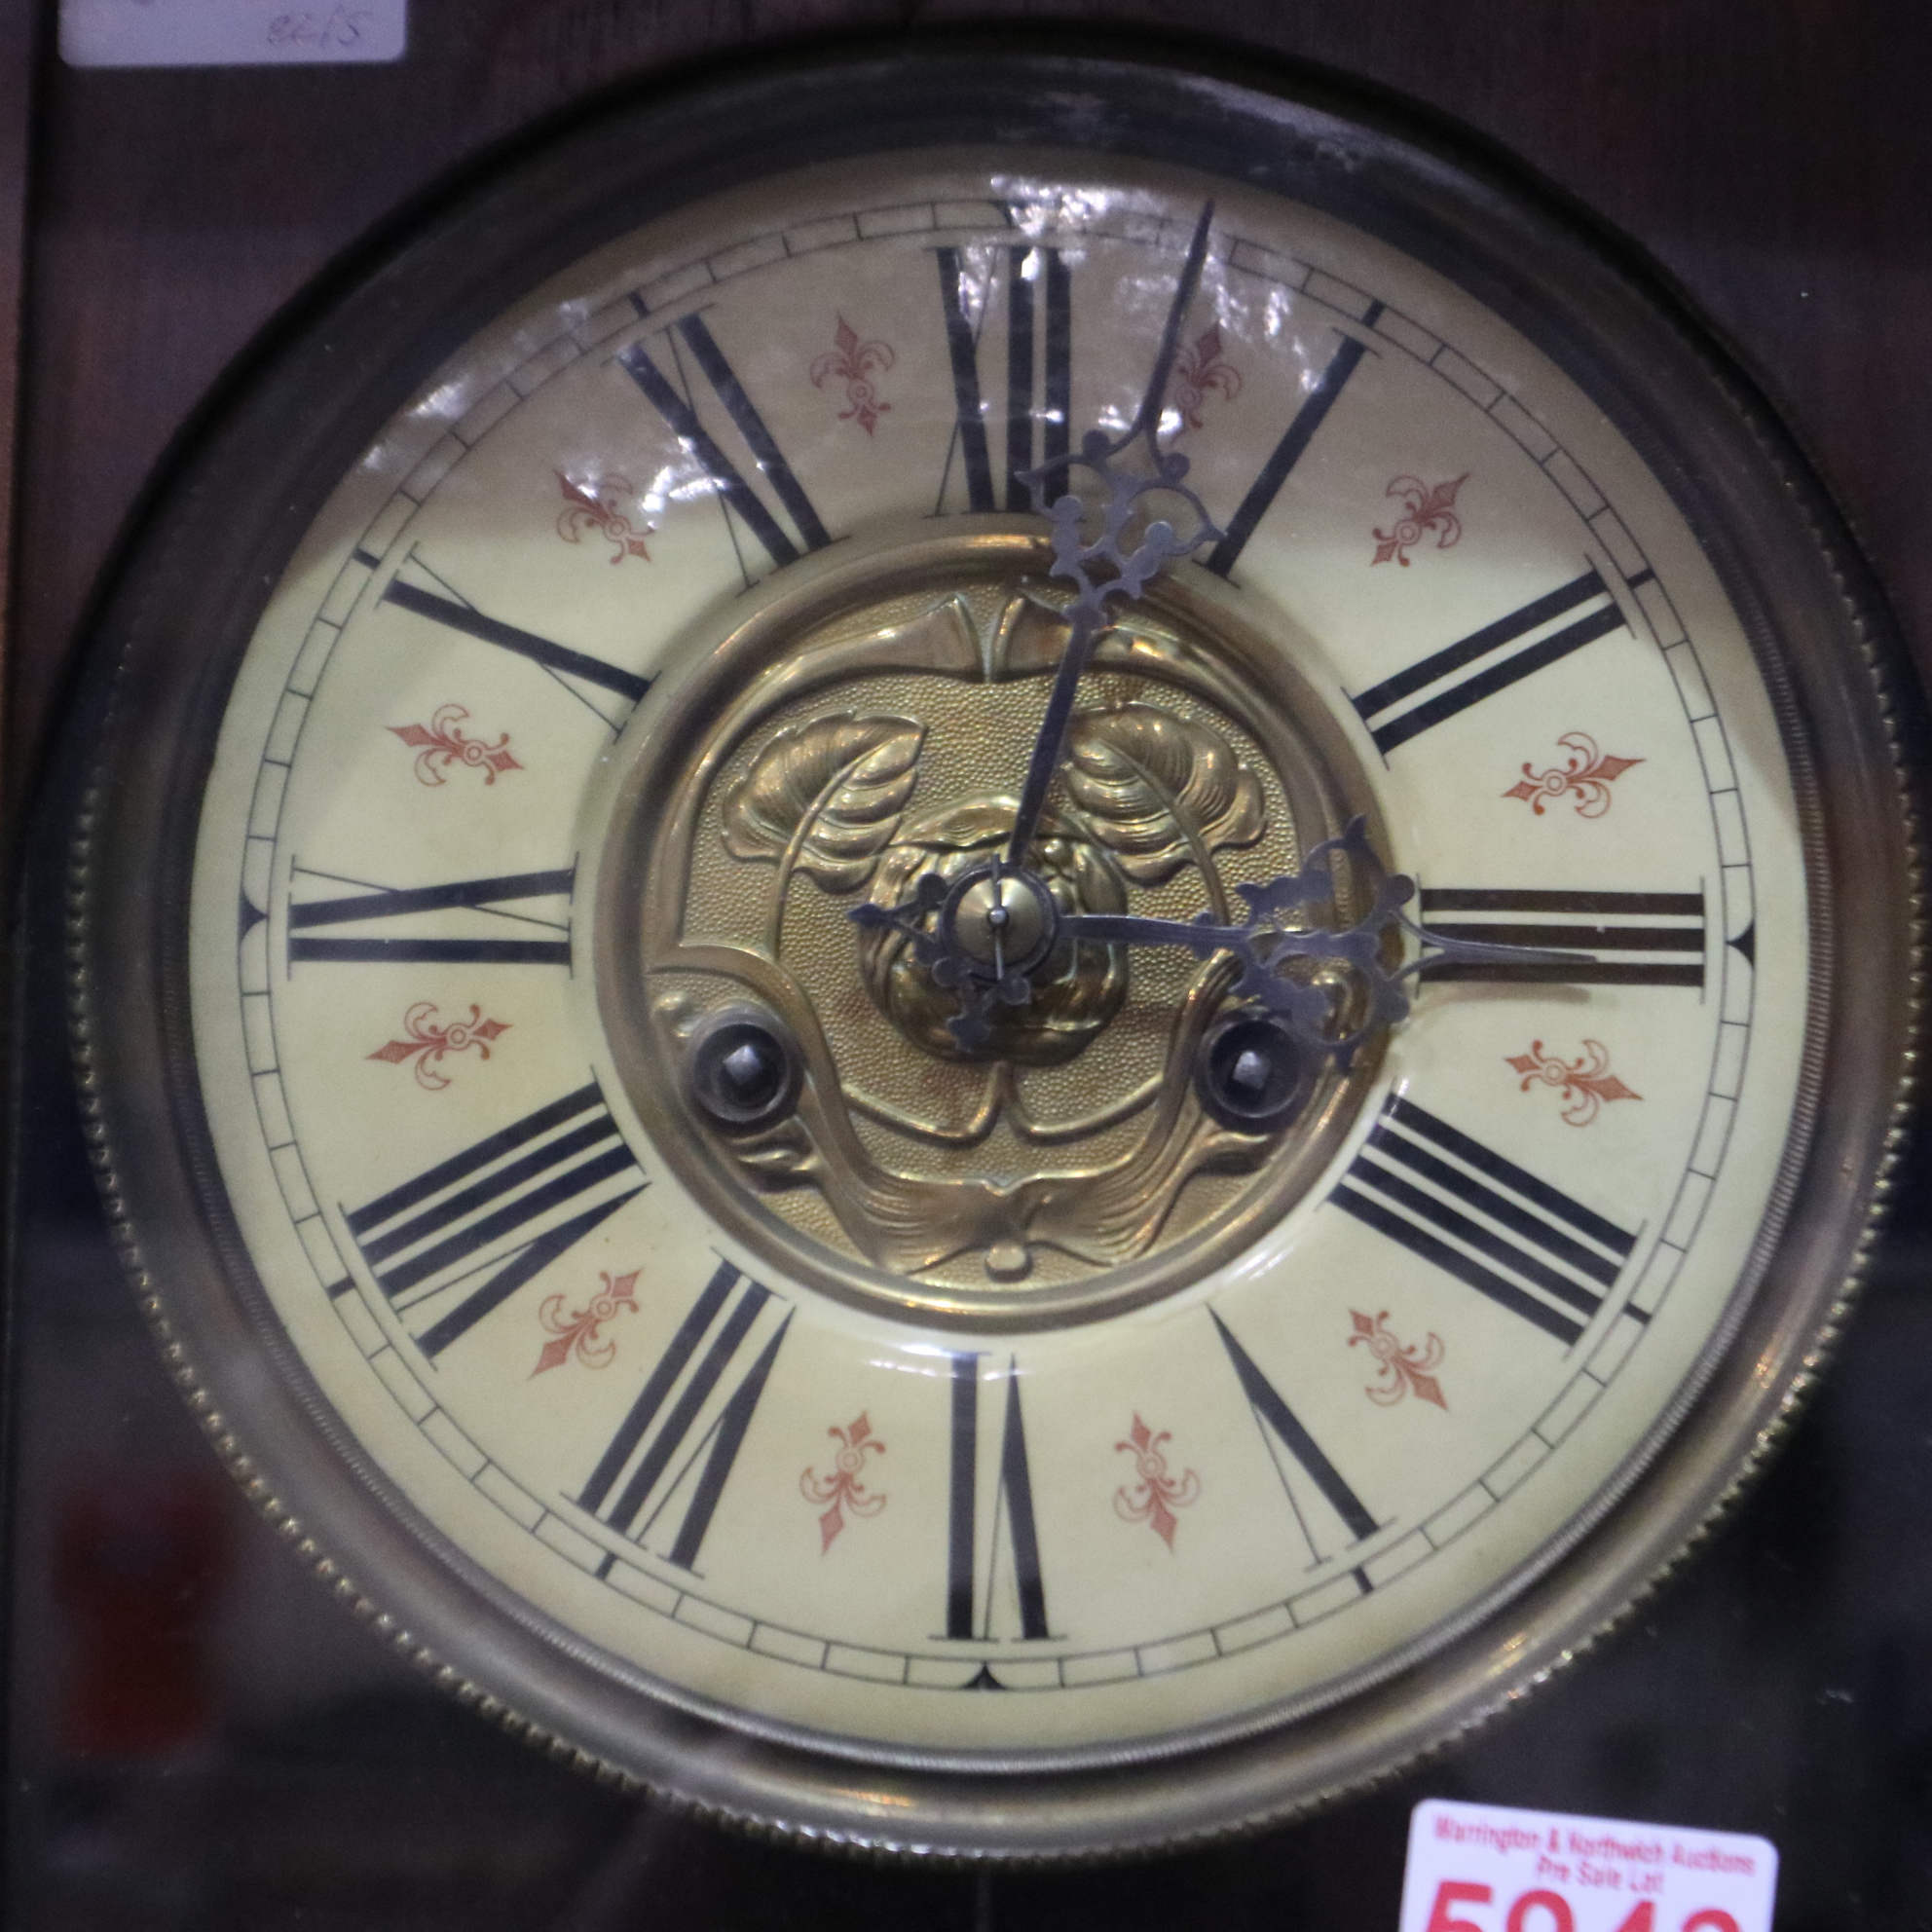 Friedrich Mouthe 19th century German antique wall clock with glazed pendulum display door, H: 107 - Image 2 of 2